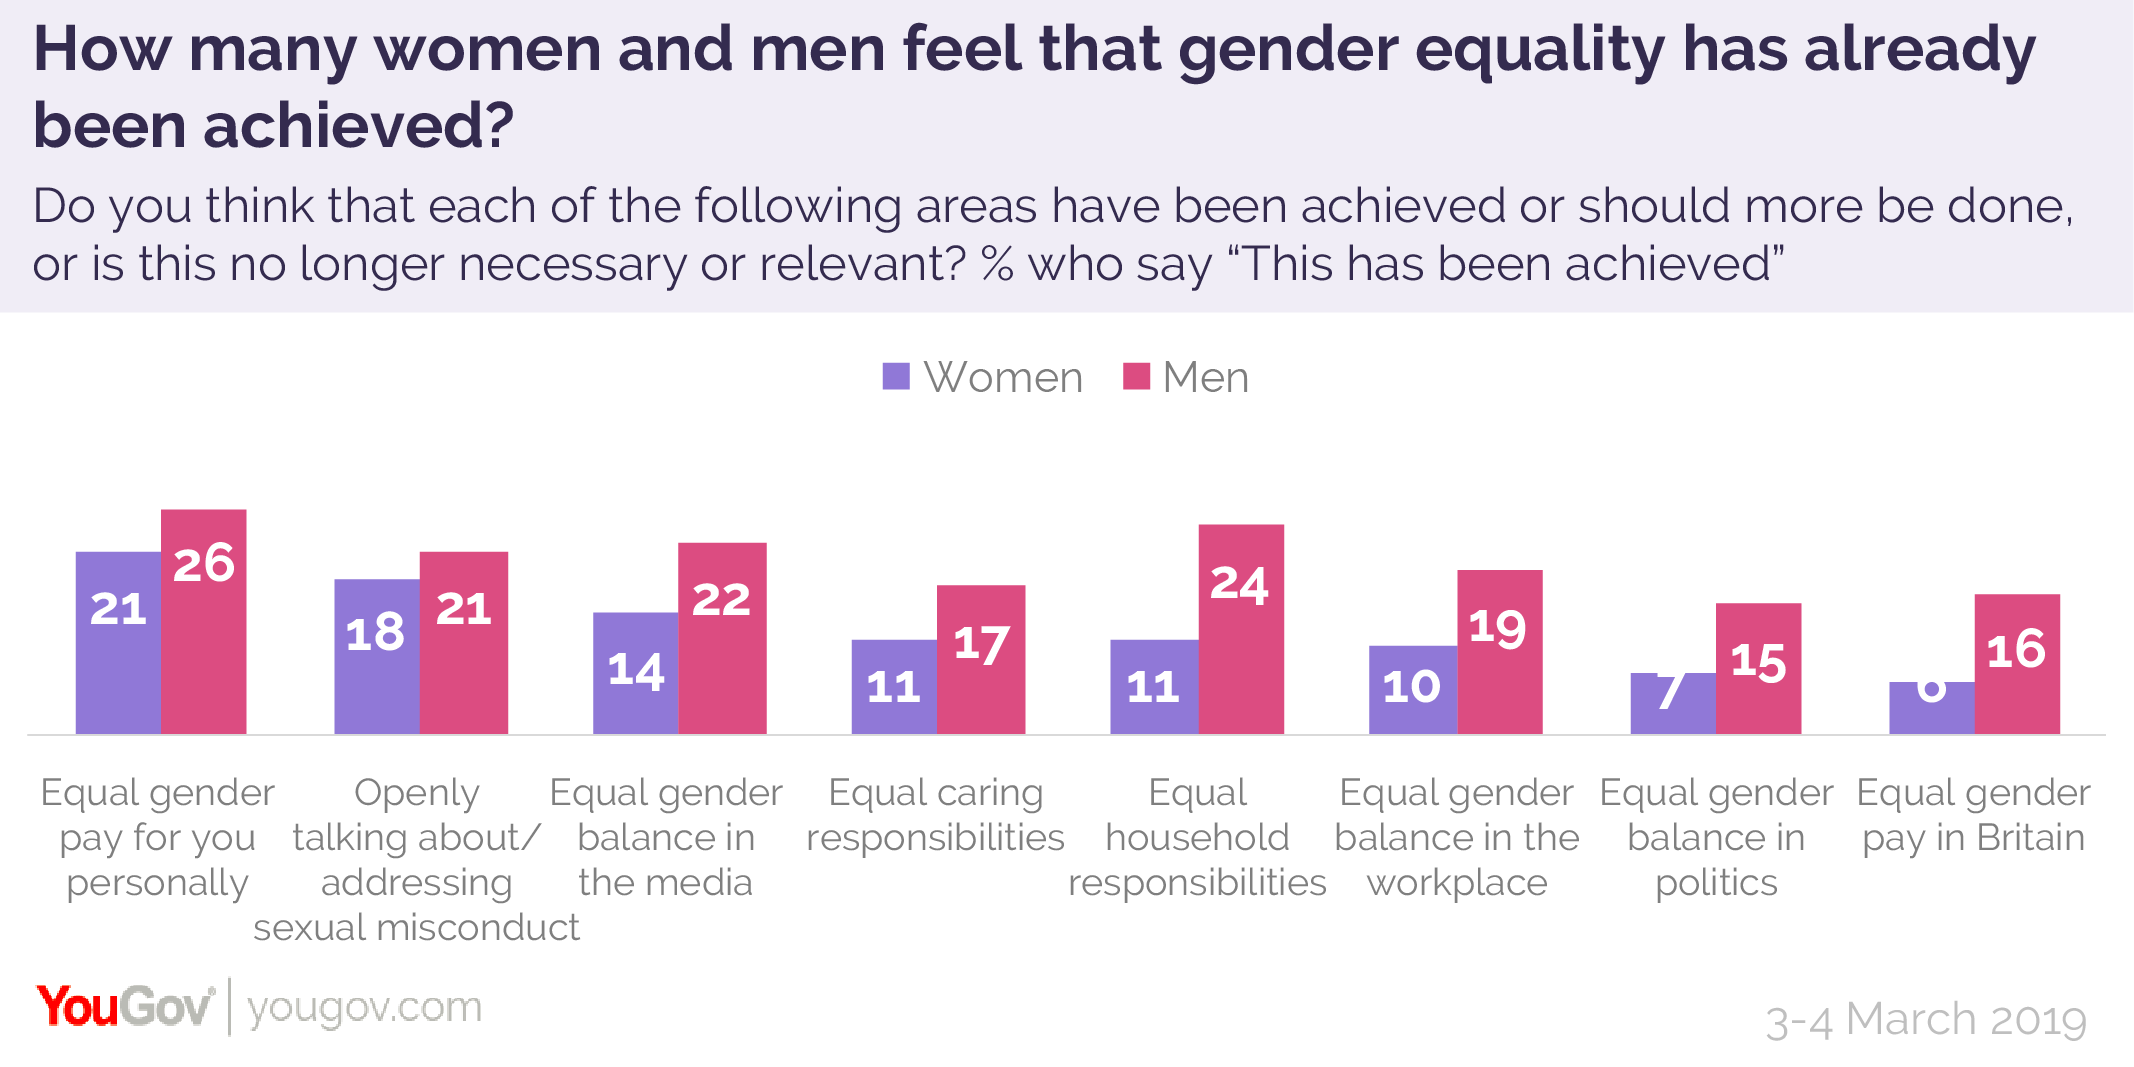 slutpunkt Se venligst Express Majority of Britons think gender equality has yet to be reached in seven  key areas | YouGov